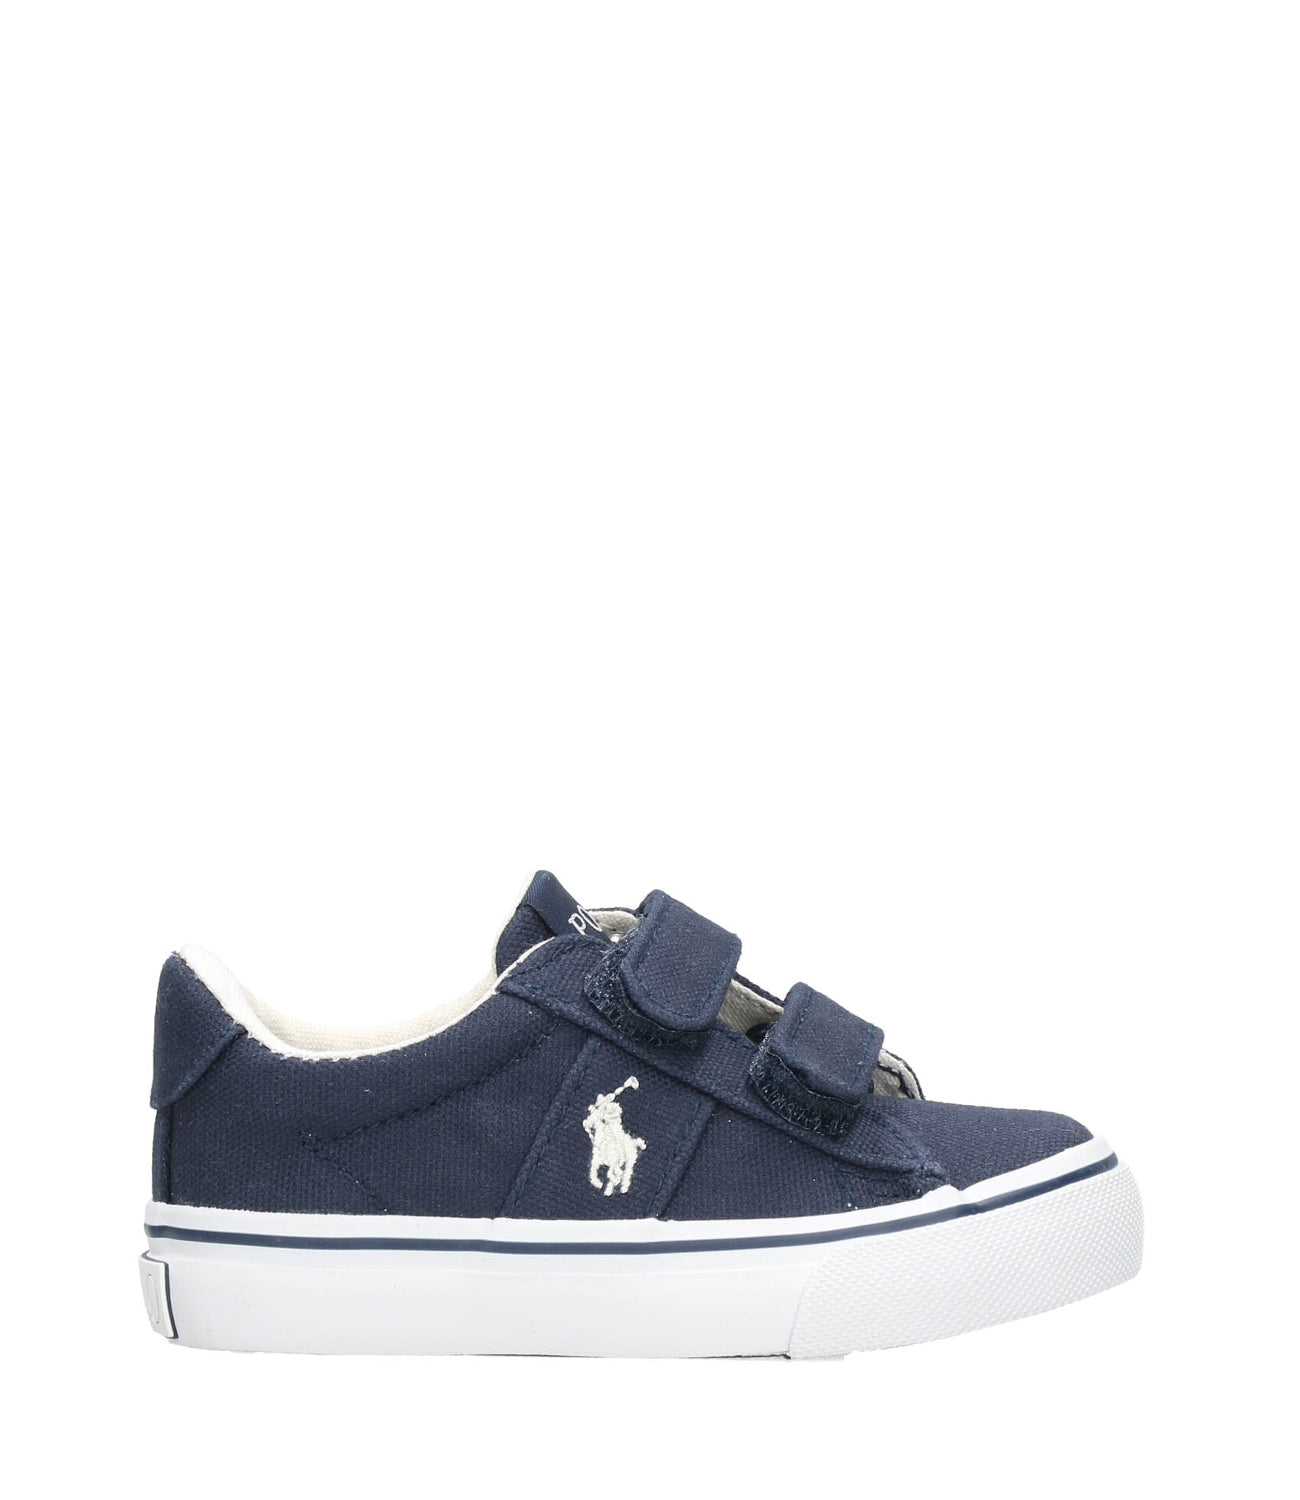 Ralph Lauren Childrenswear | Sneakers Navy Blue and White